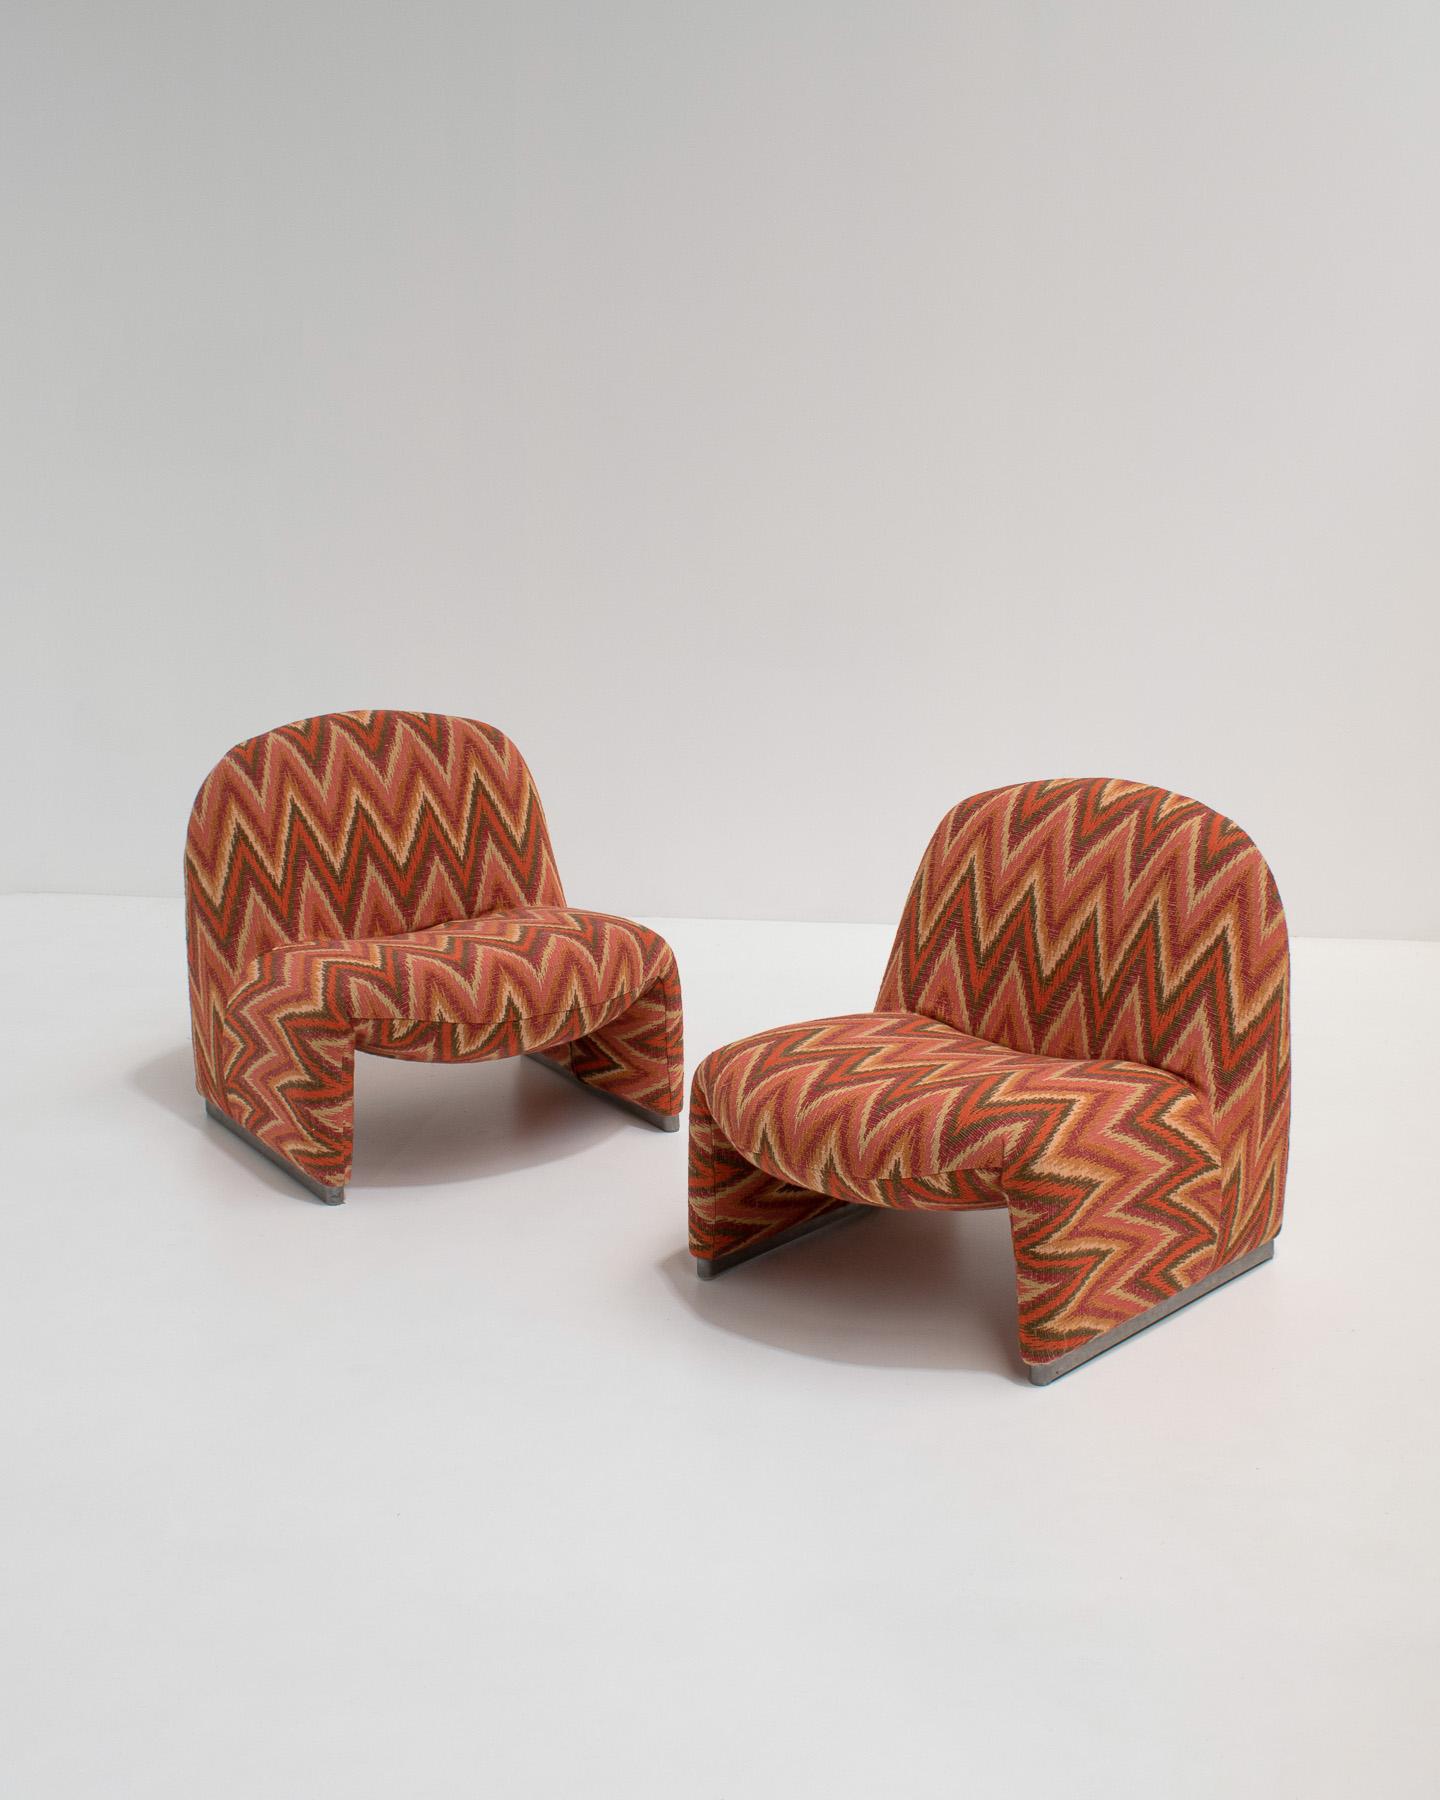 Steel Pair of Alky Chairs in Zig Zag Fabric by Giancarlo Piretti, 1970s